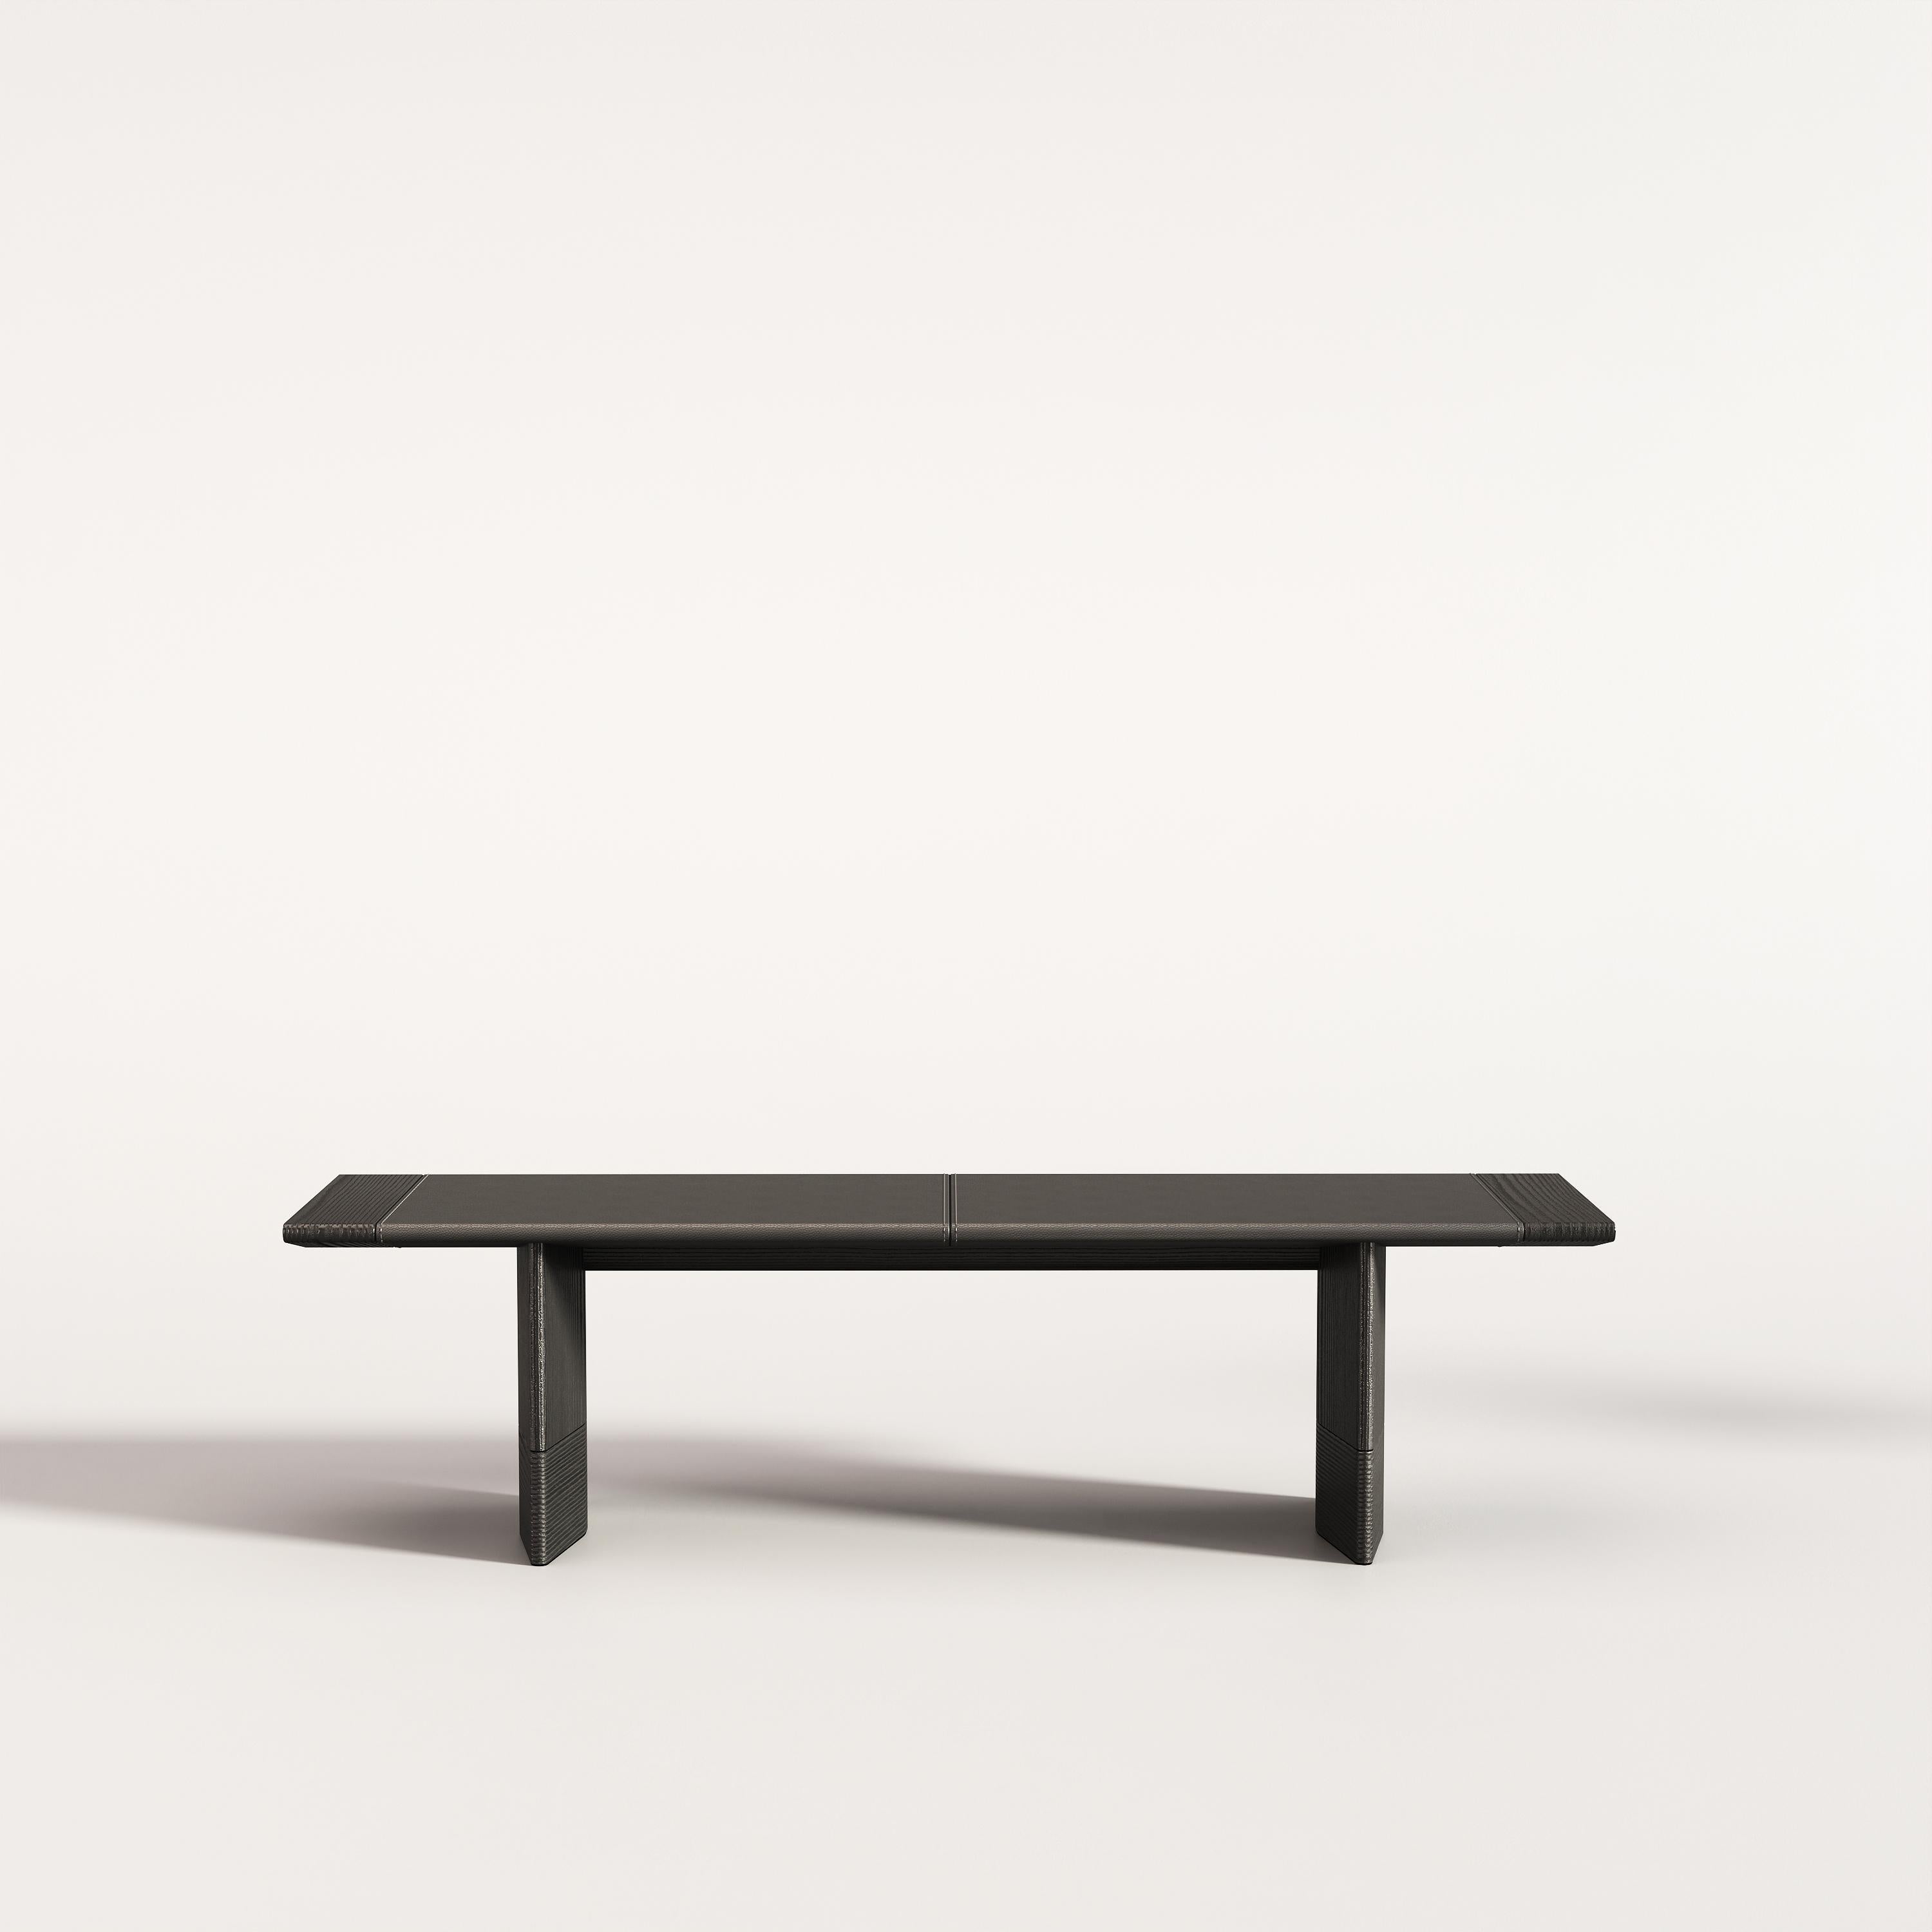 Temple bench by Emre Yunus Uzun
Dimensions: D 140 x W 40 x H 40 cm
Materials: Brushed oak wood, leather top.
Custom sizes and finishes available.

Temple Collection consists of three complimentary pieces; a table, a bench and a tabletop tray.